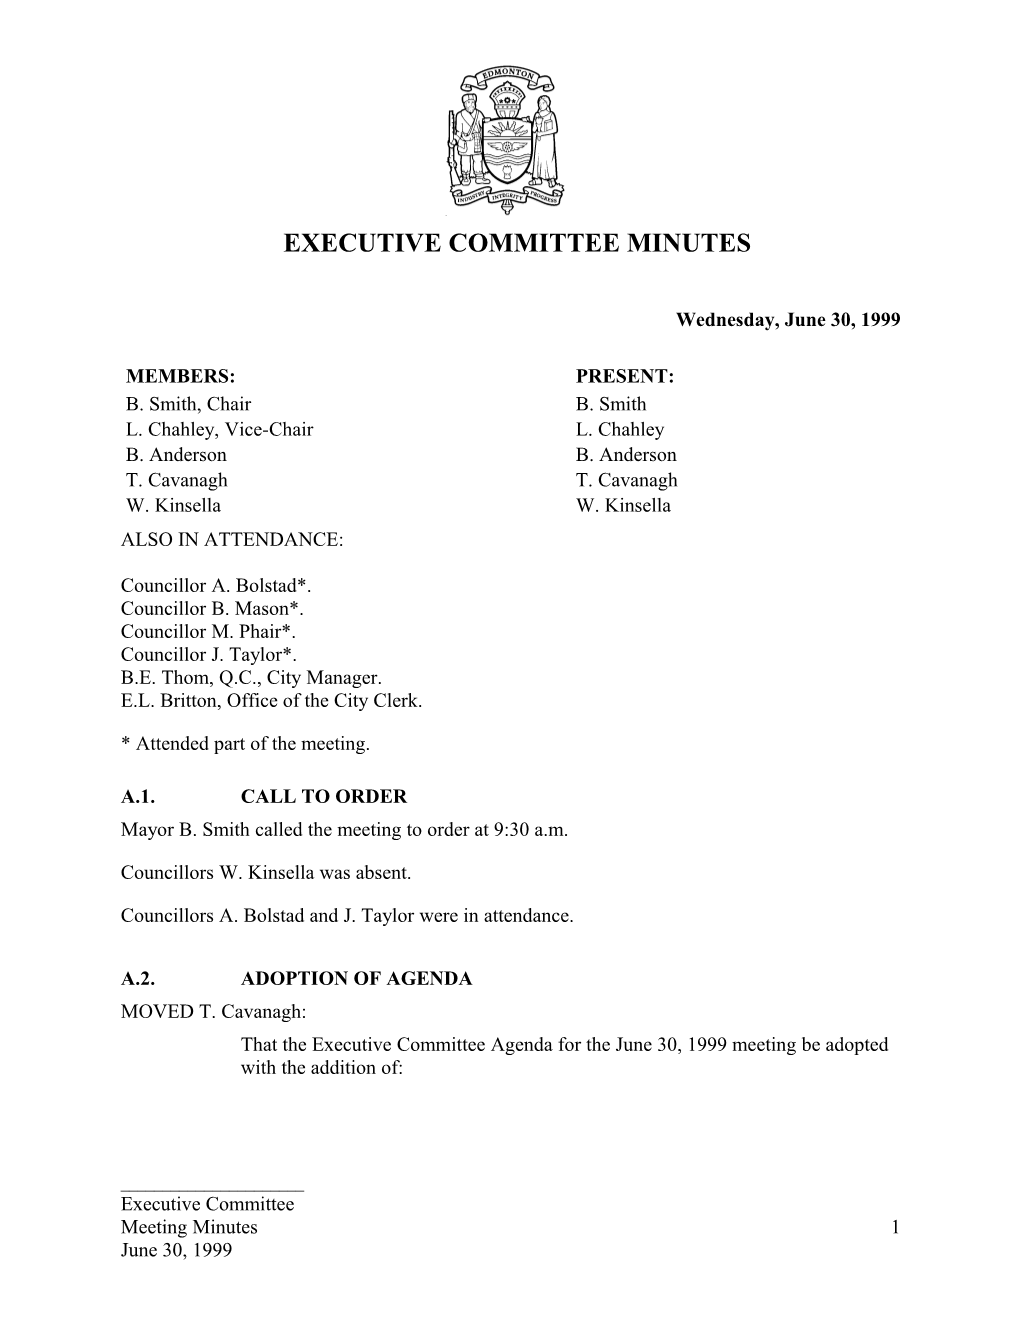 Minutes for Executive Committee June 30, 1999 Meeting